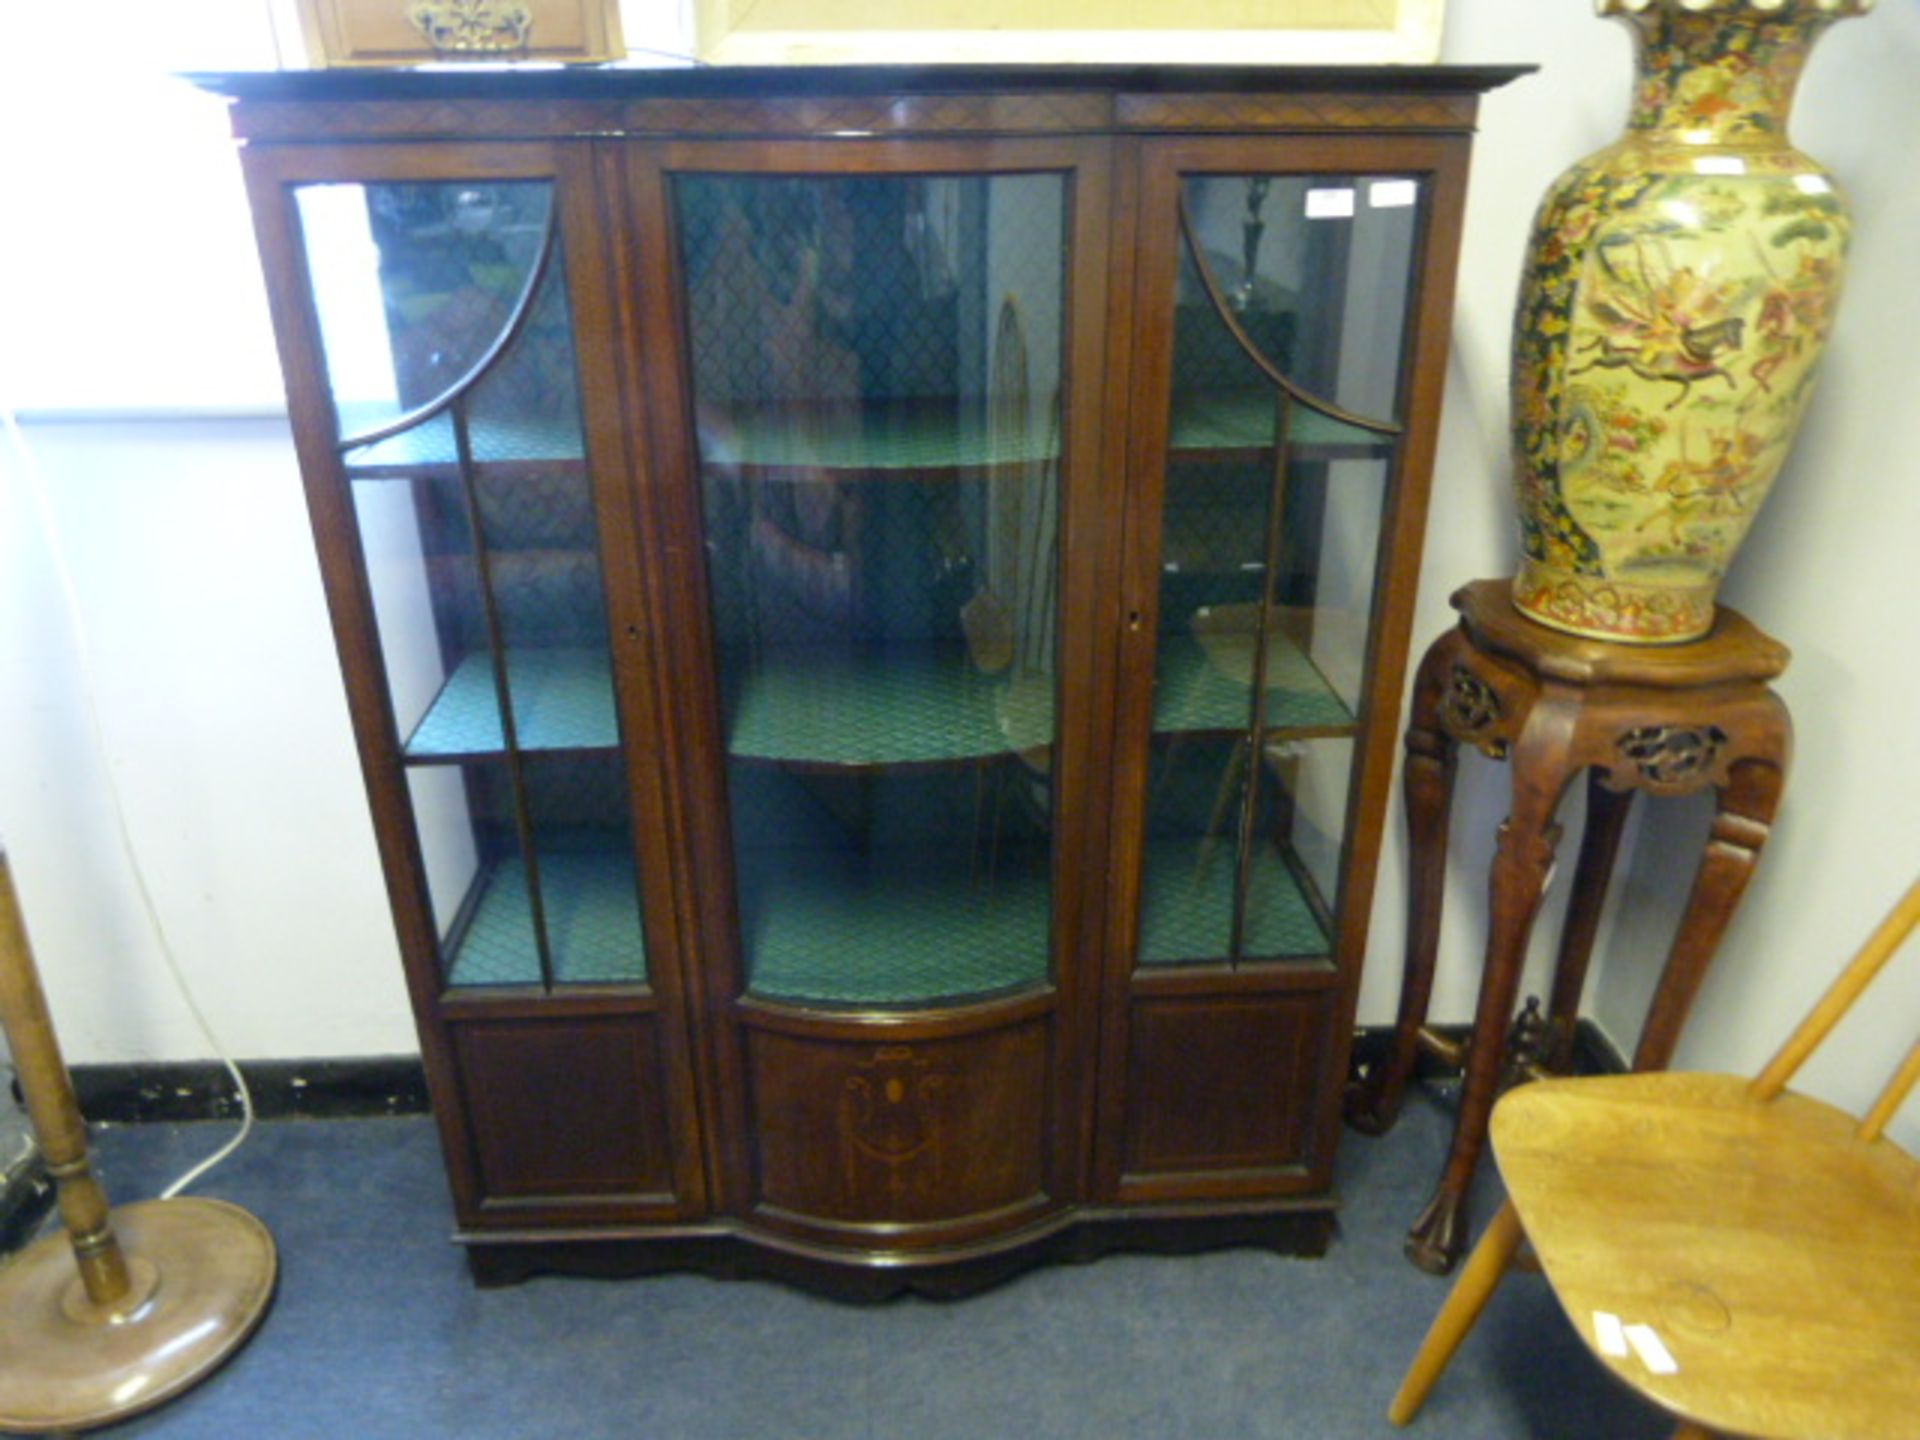 Edwardian Display Unit with Inlaid Detail